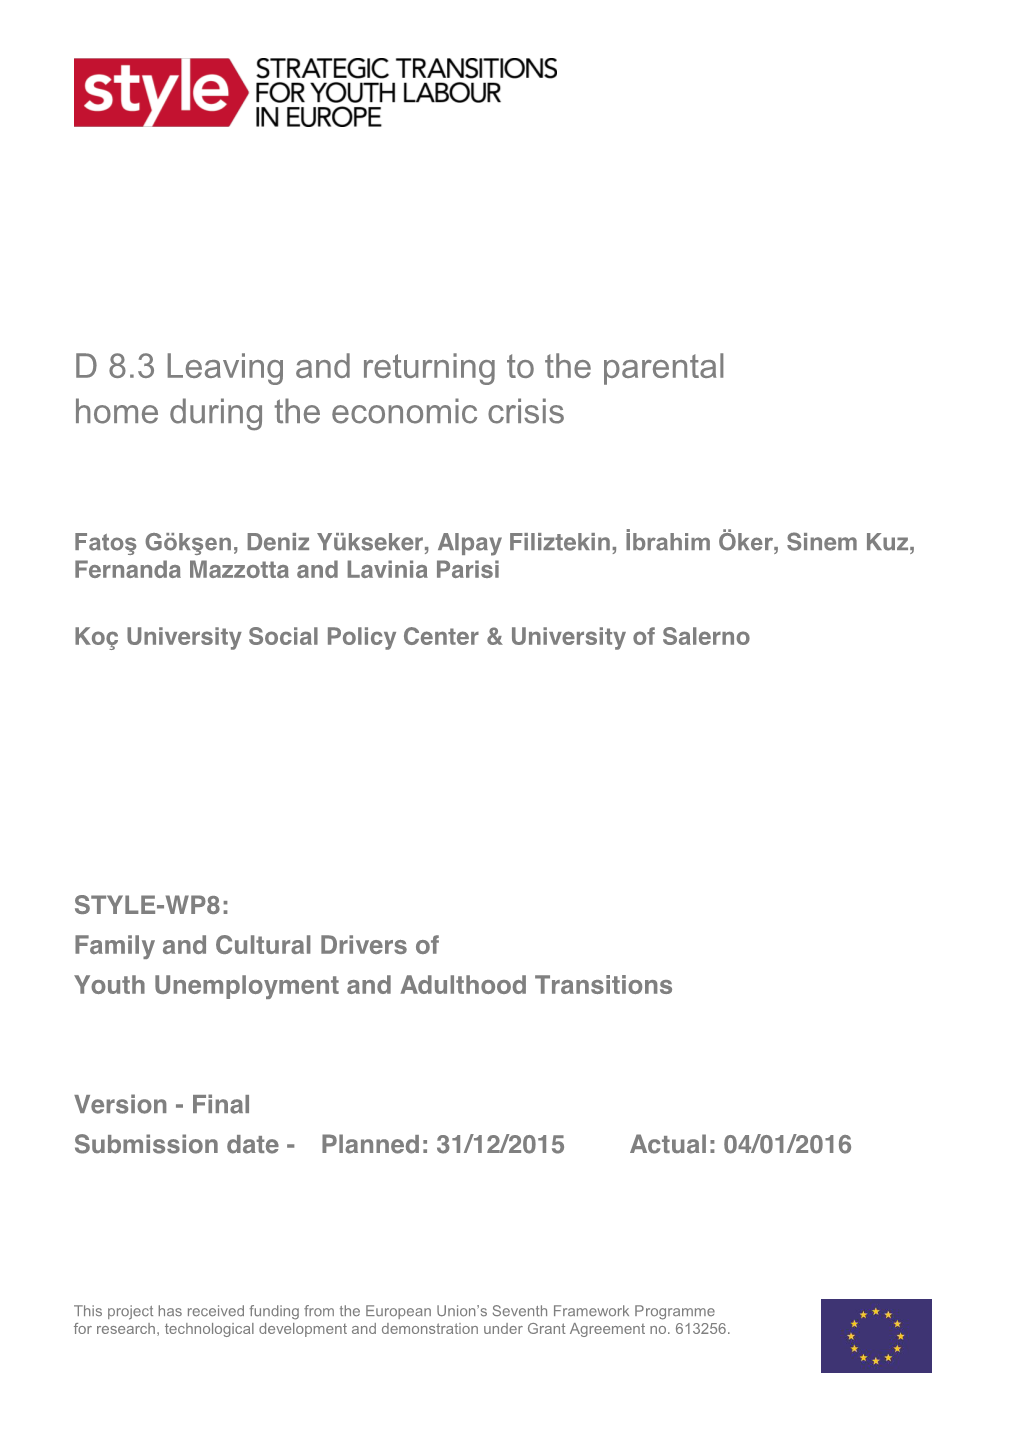 STYLE Working Paper WP8.3 Leaving and Returning to the Parental Home